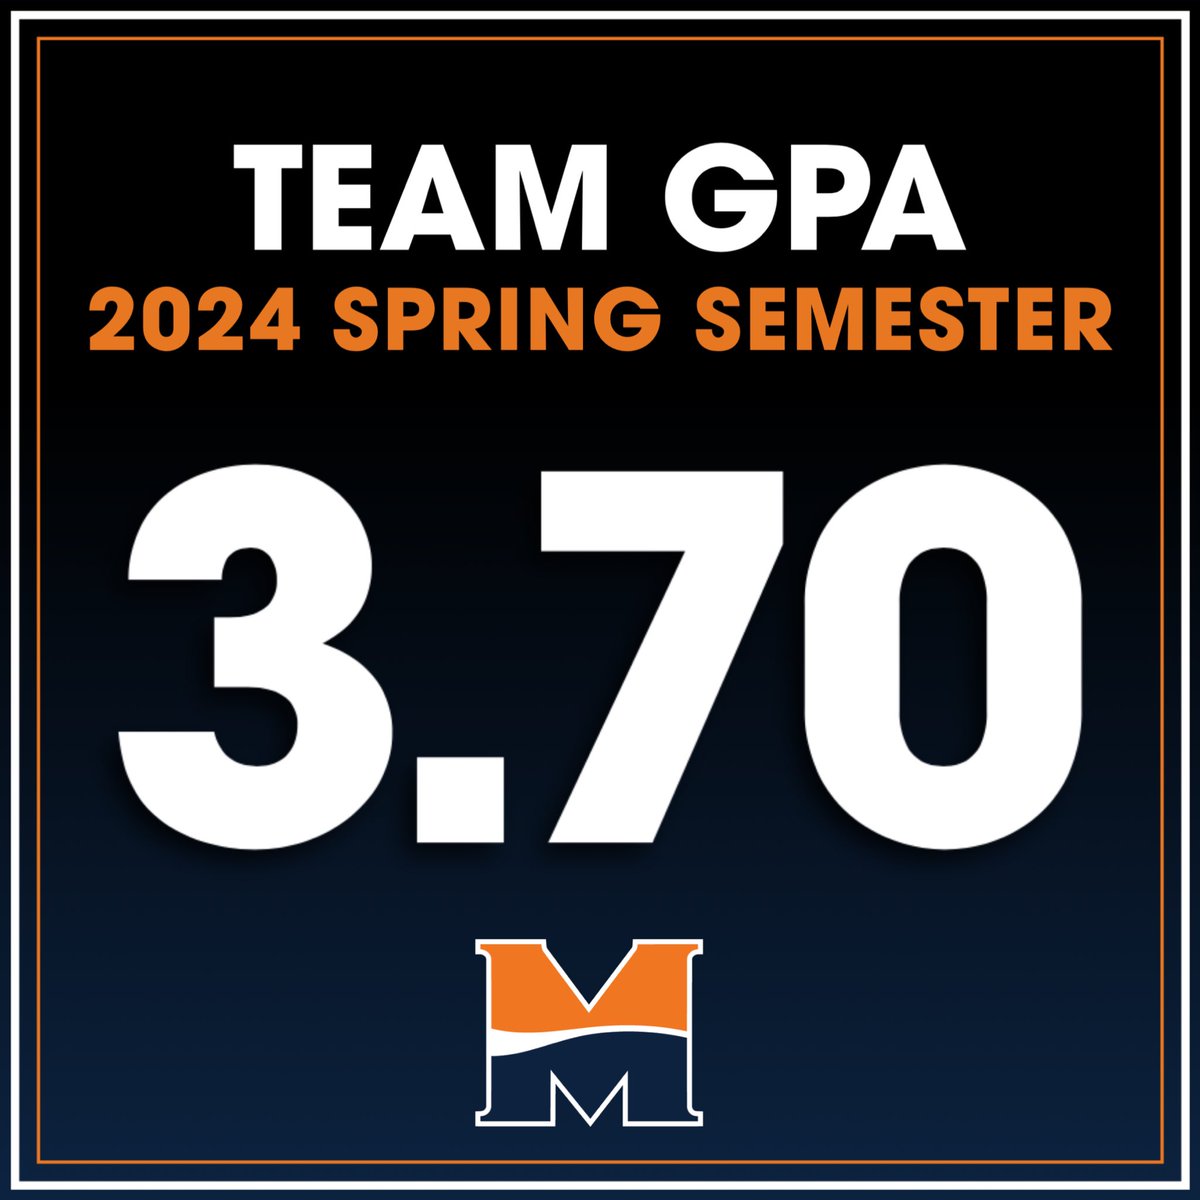 Crushed it. Again. 💁‍♀️ National tournament quarterfinalists on the court, and champions in the classroom. Congrats to our volleyball student-athletes on another job well done academically this semester. 🧡👏